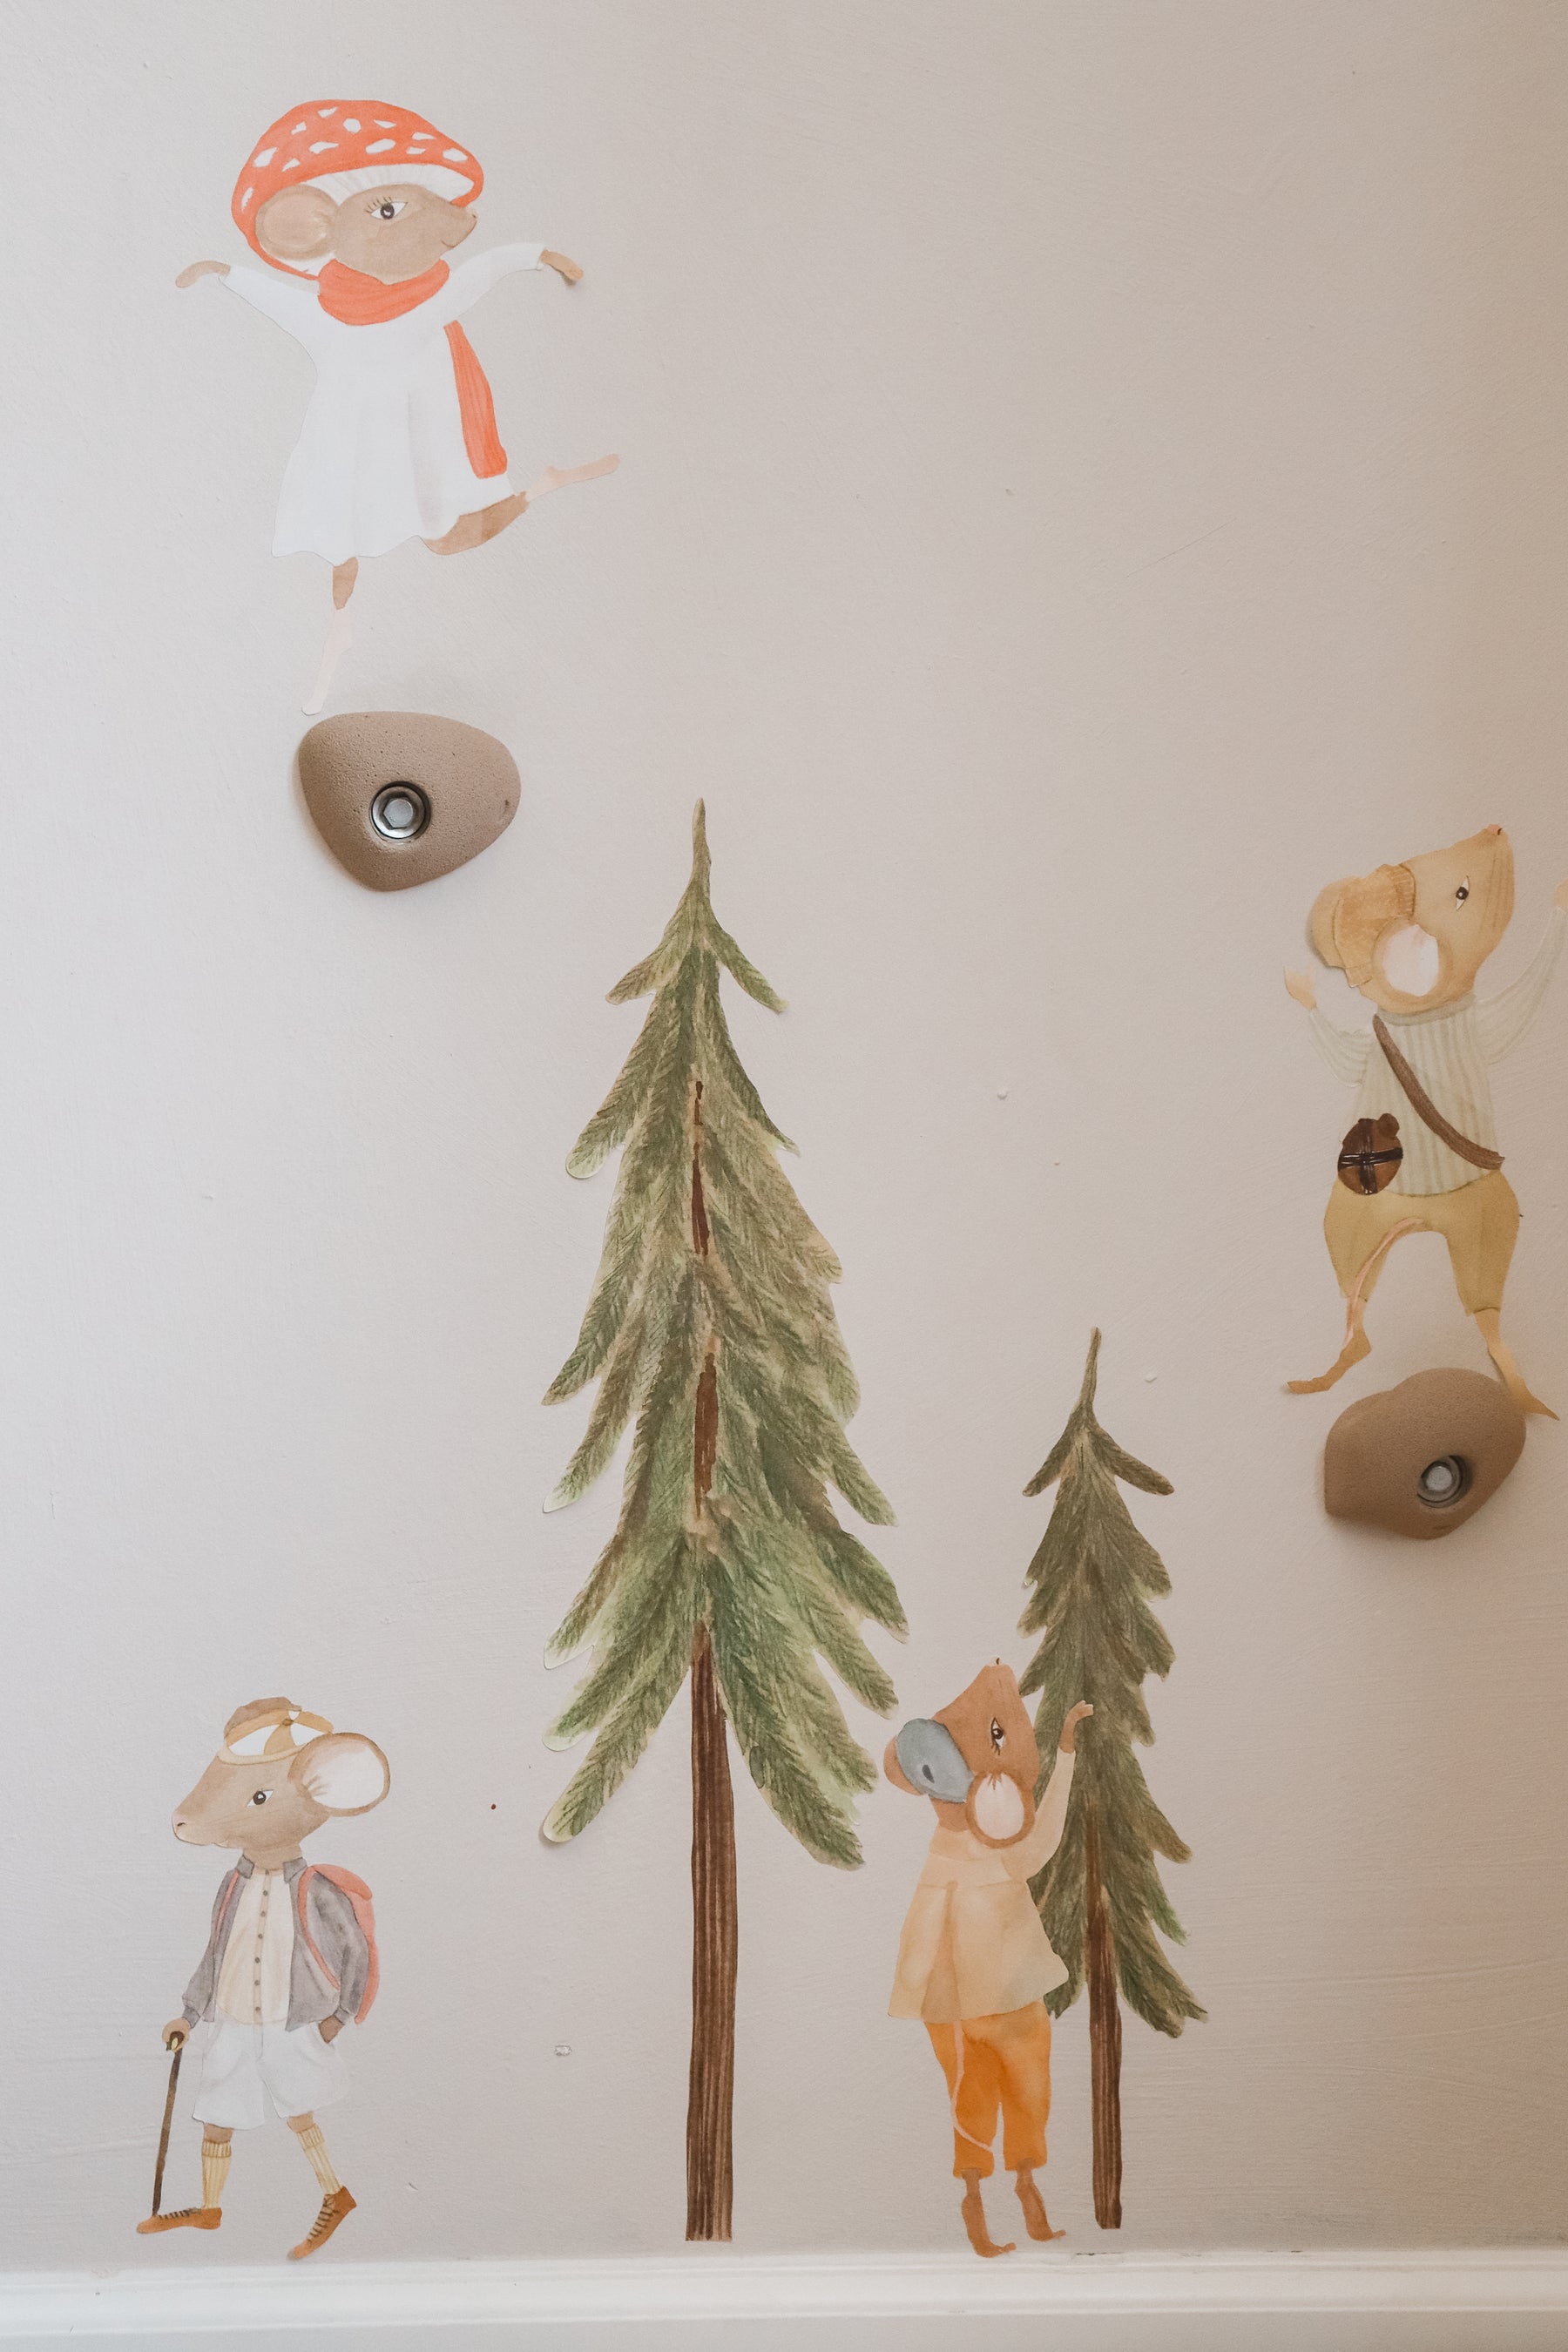 That's Mine Wallsticker Pinetrees small Green